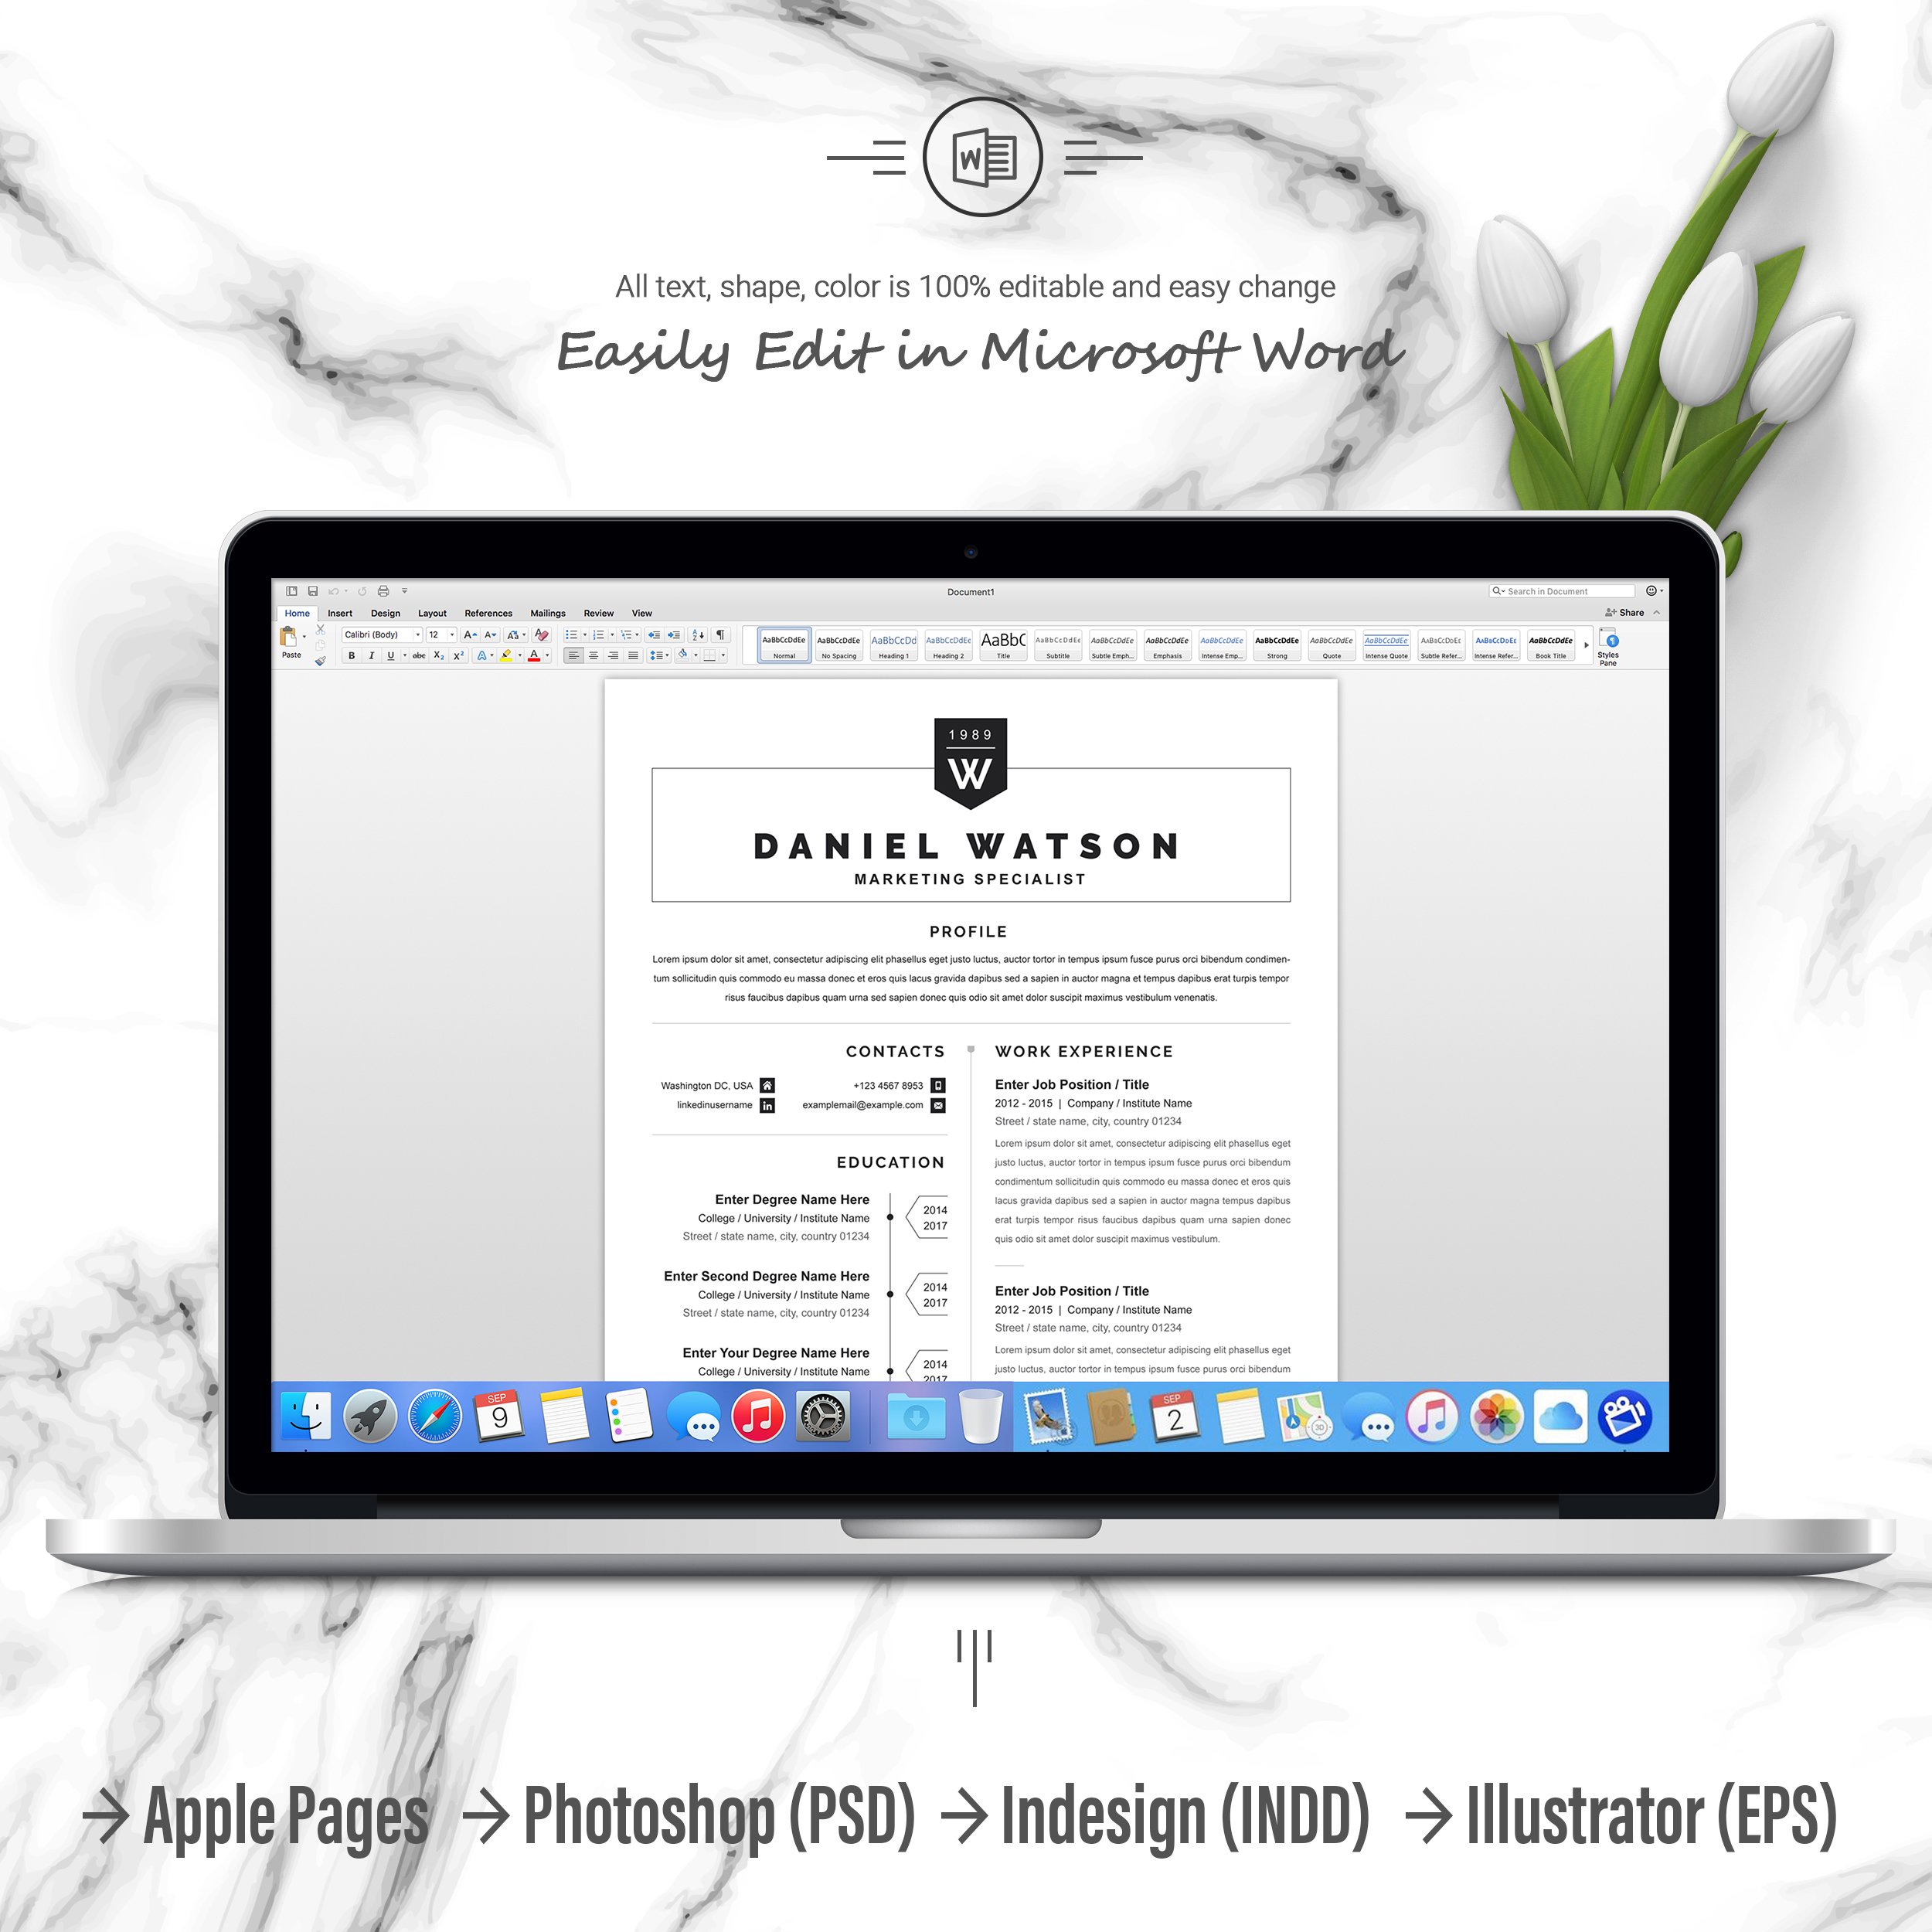 06 3 pages free resume ms word file format design template 586